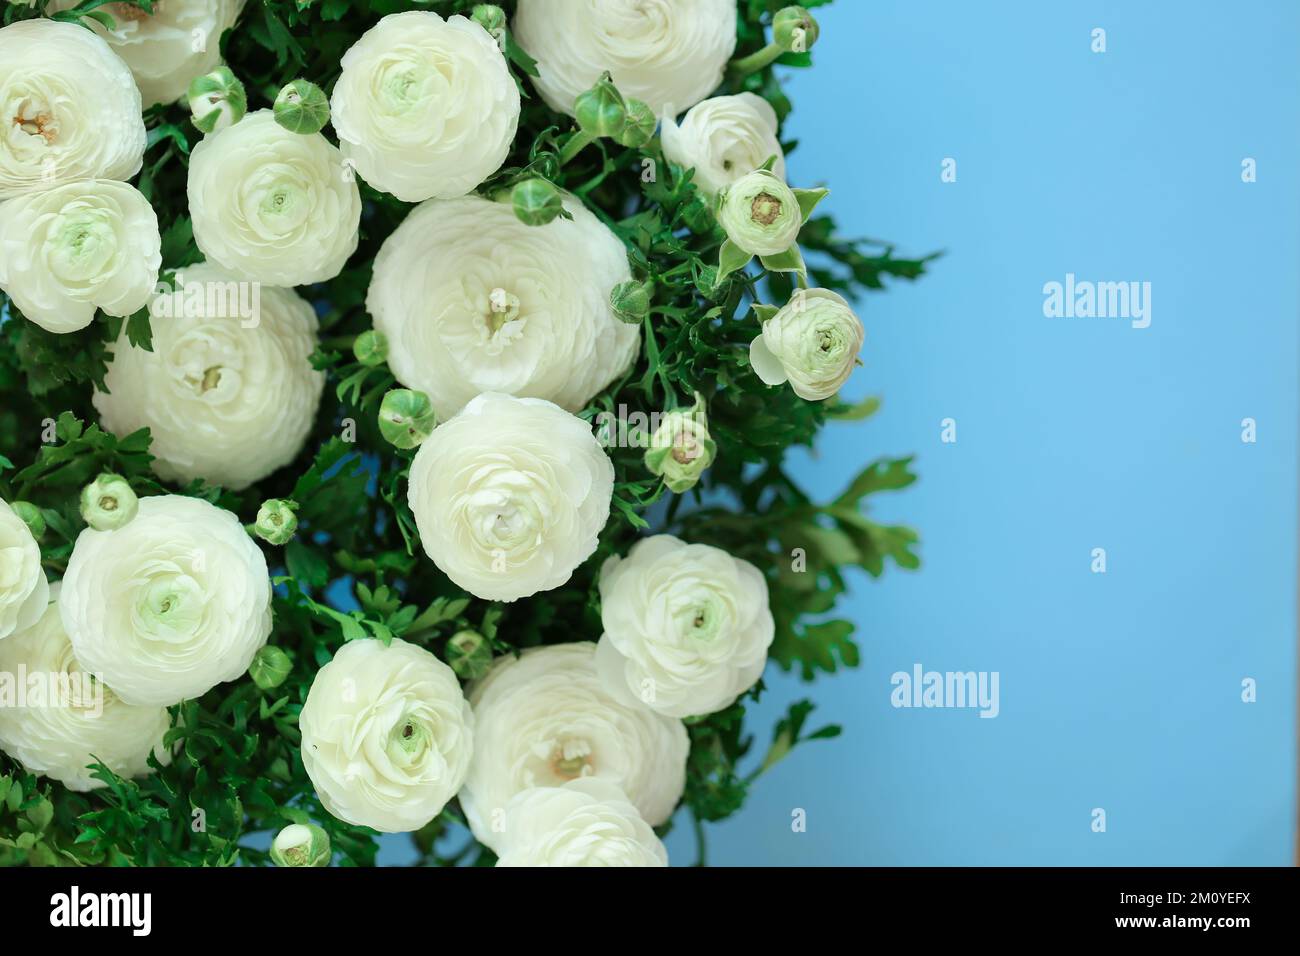 ranunculus flowers border on blue background.buttercup flowers background. Floral card in white and blue colors.  Stock Photo